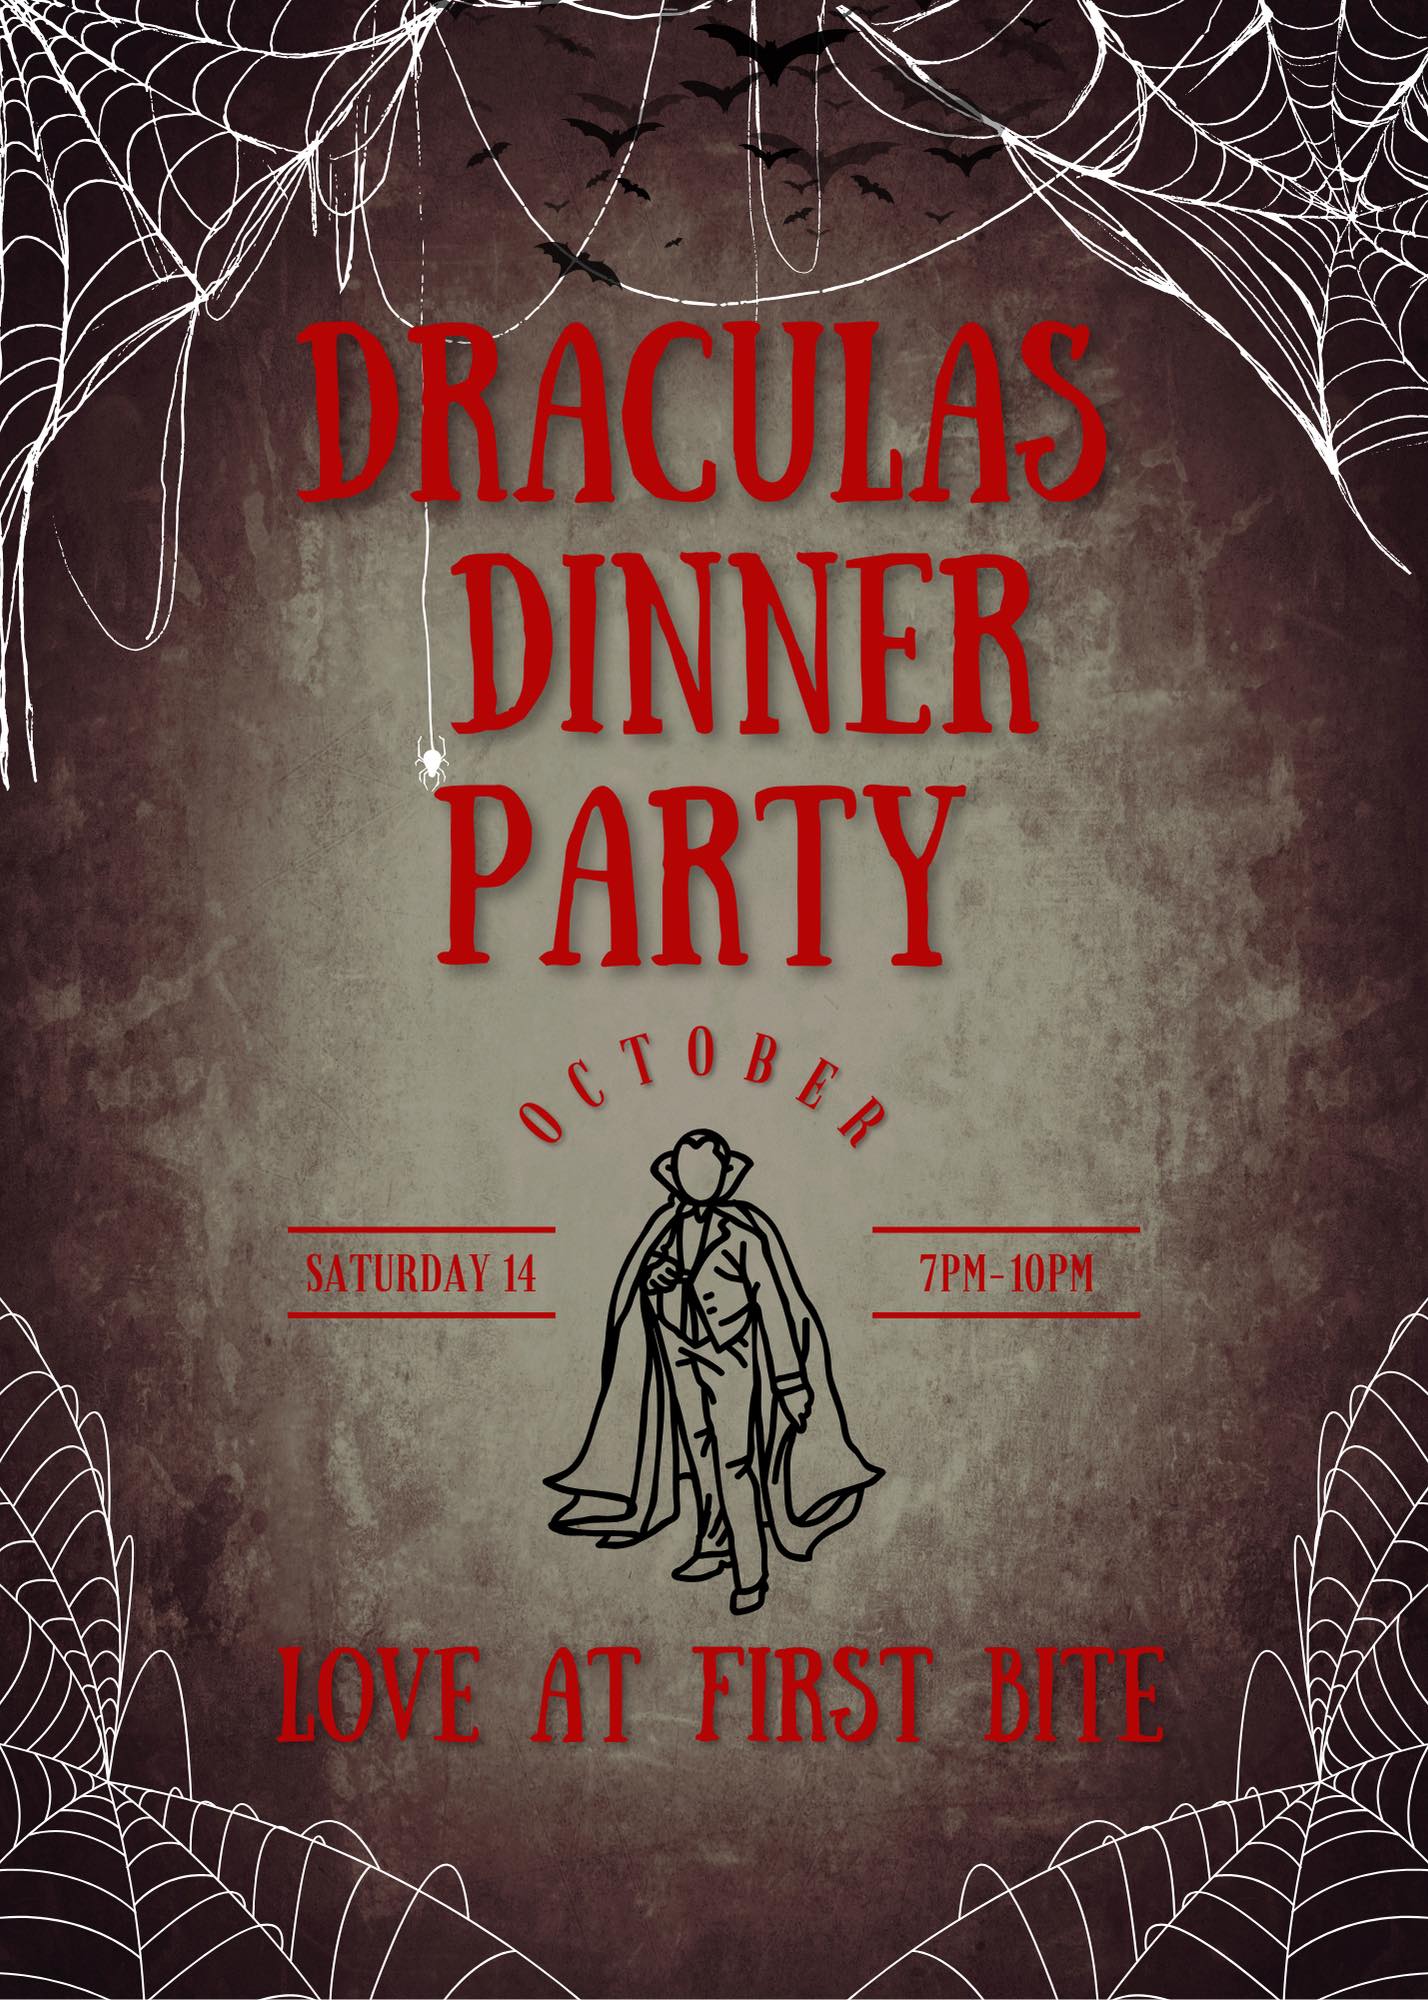 Draculas Dinner Party at Roosters